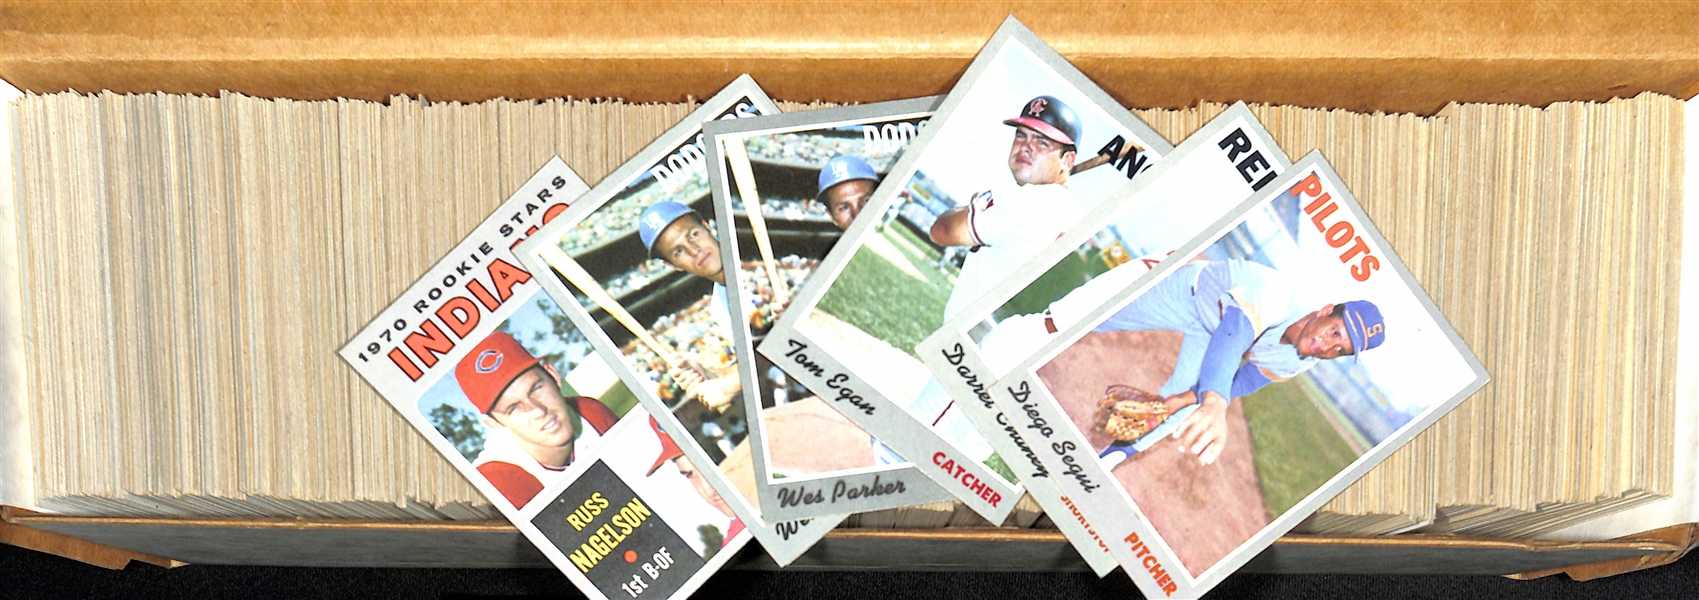 Lot of (700+) 1970 Assorted Topps Baseball Cards - Mostly Commons